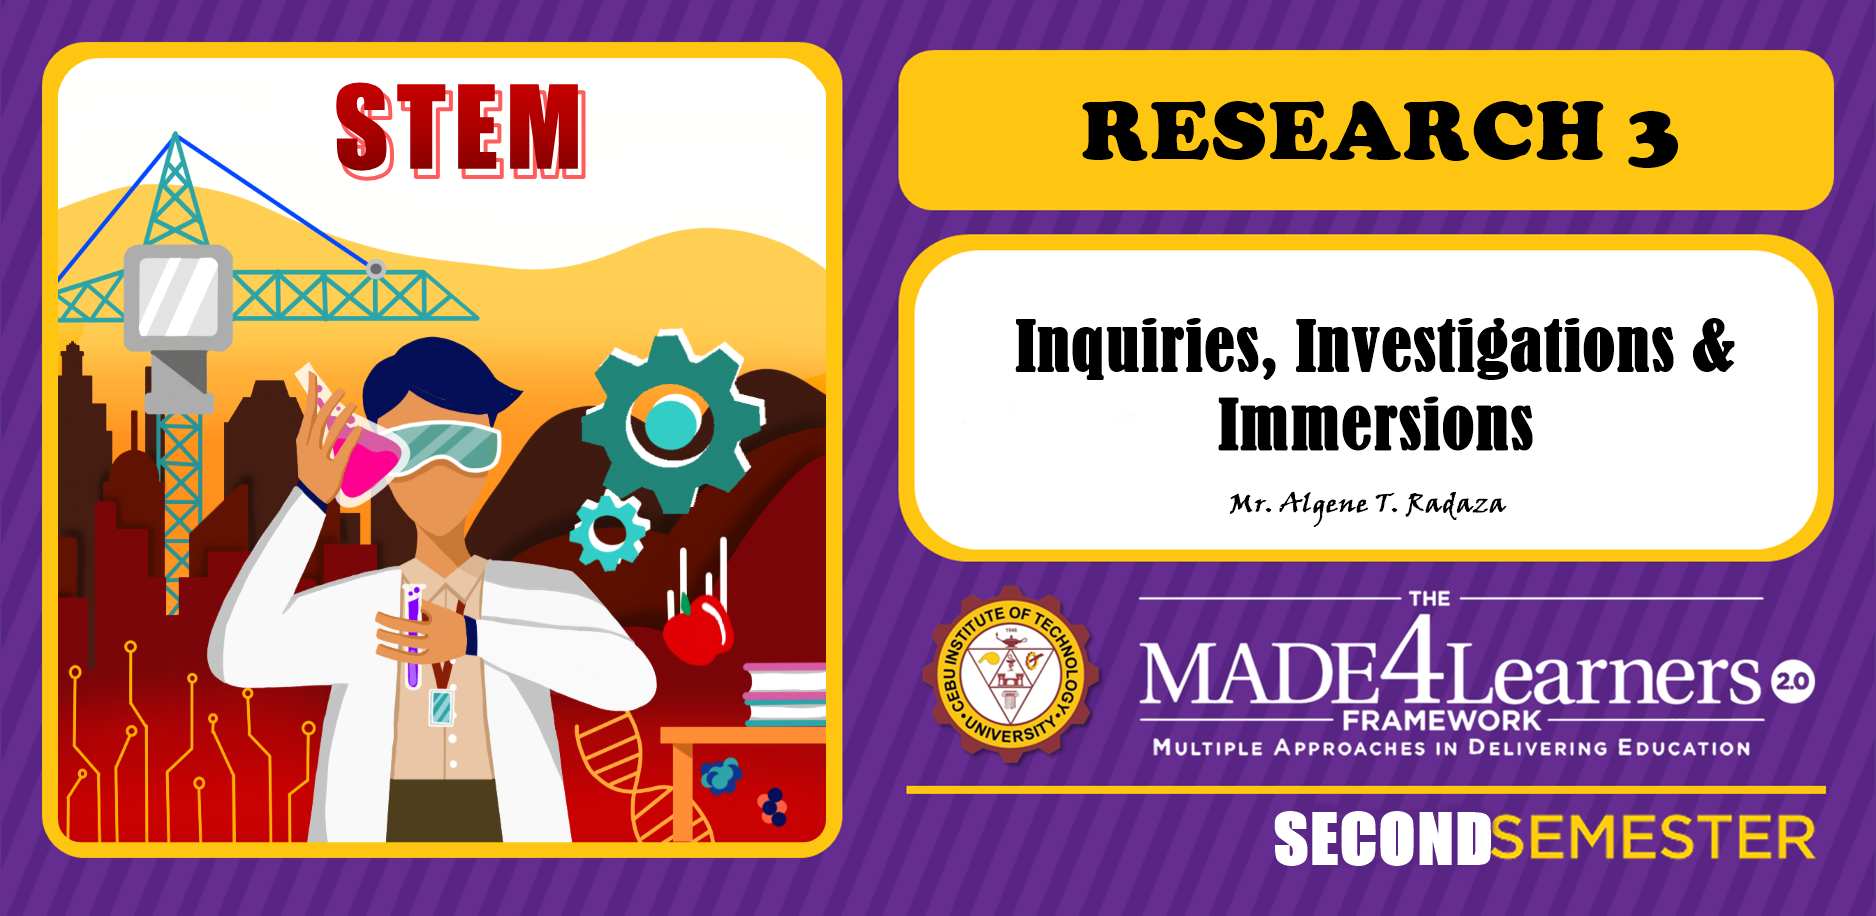 RES3: Research Inquiries, Investigations and Immersions (Radaza)